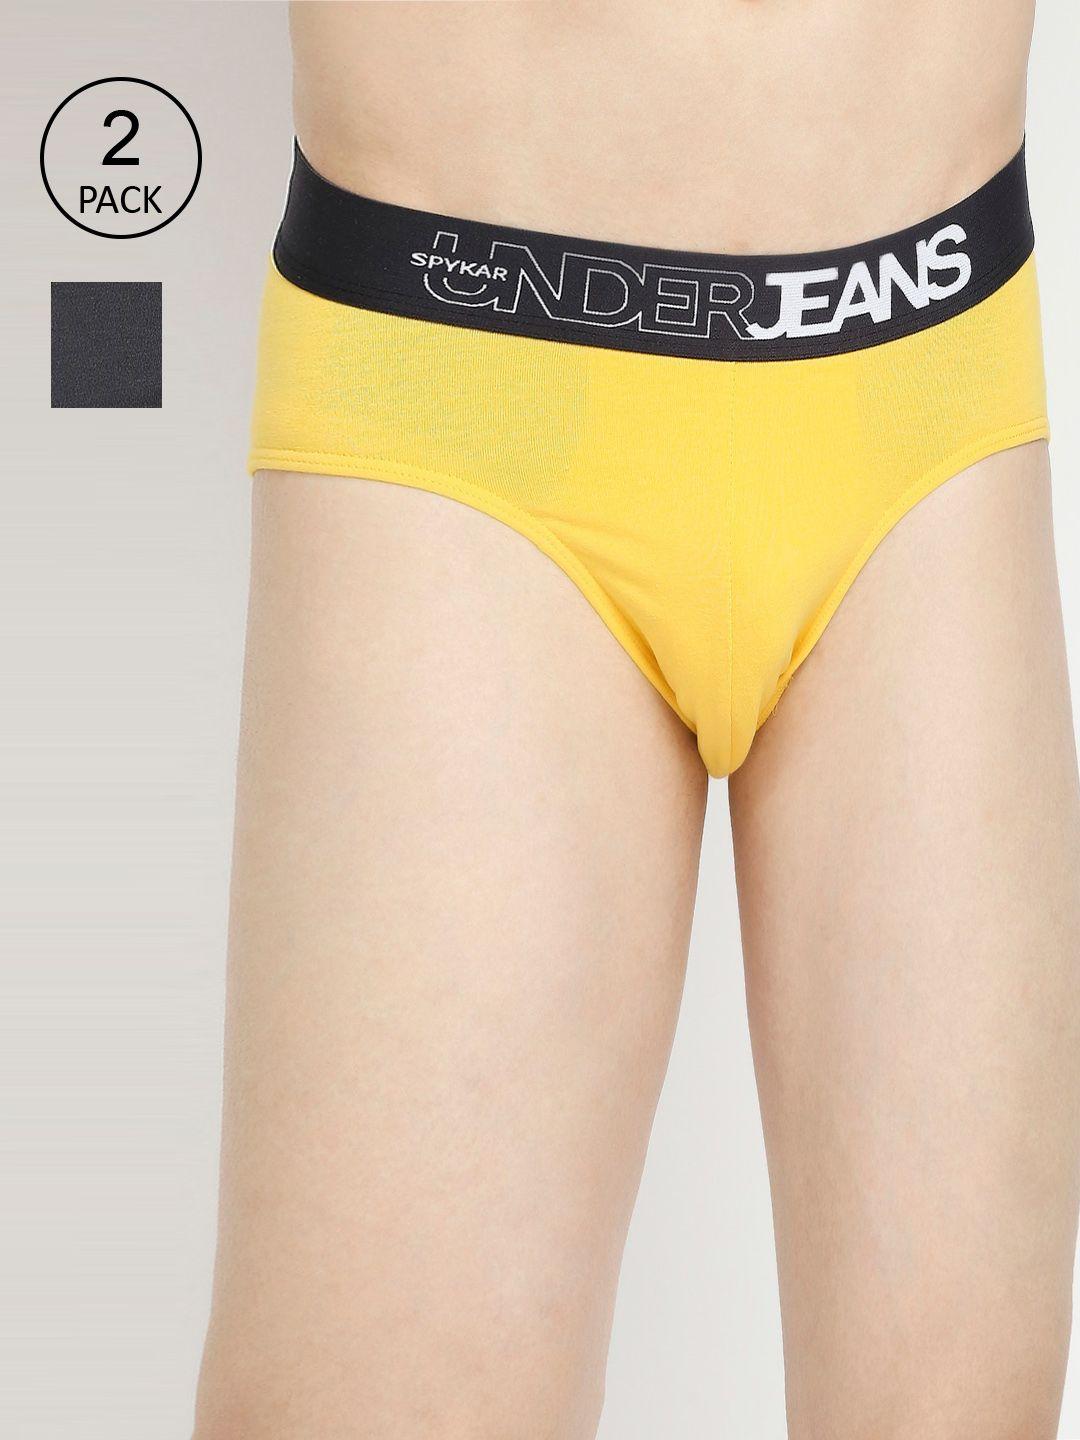 underjeans-by-spykar-men-yellow-&-grey-pack-of-2-solid-basic-briefs